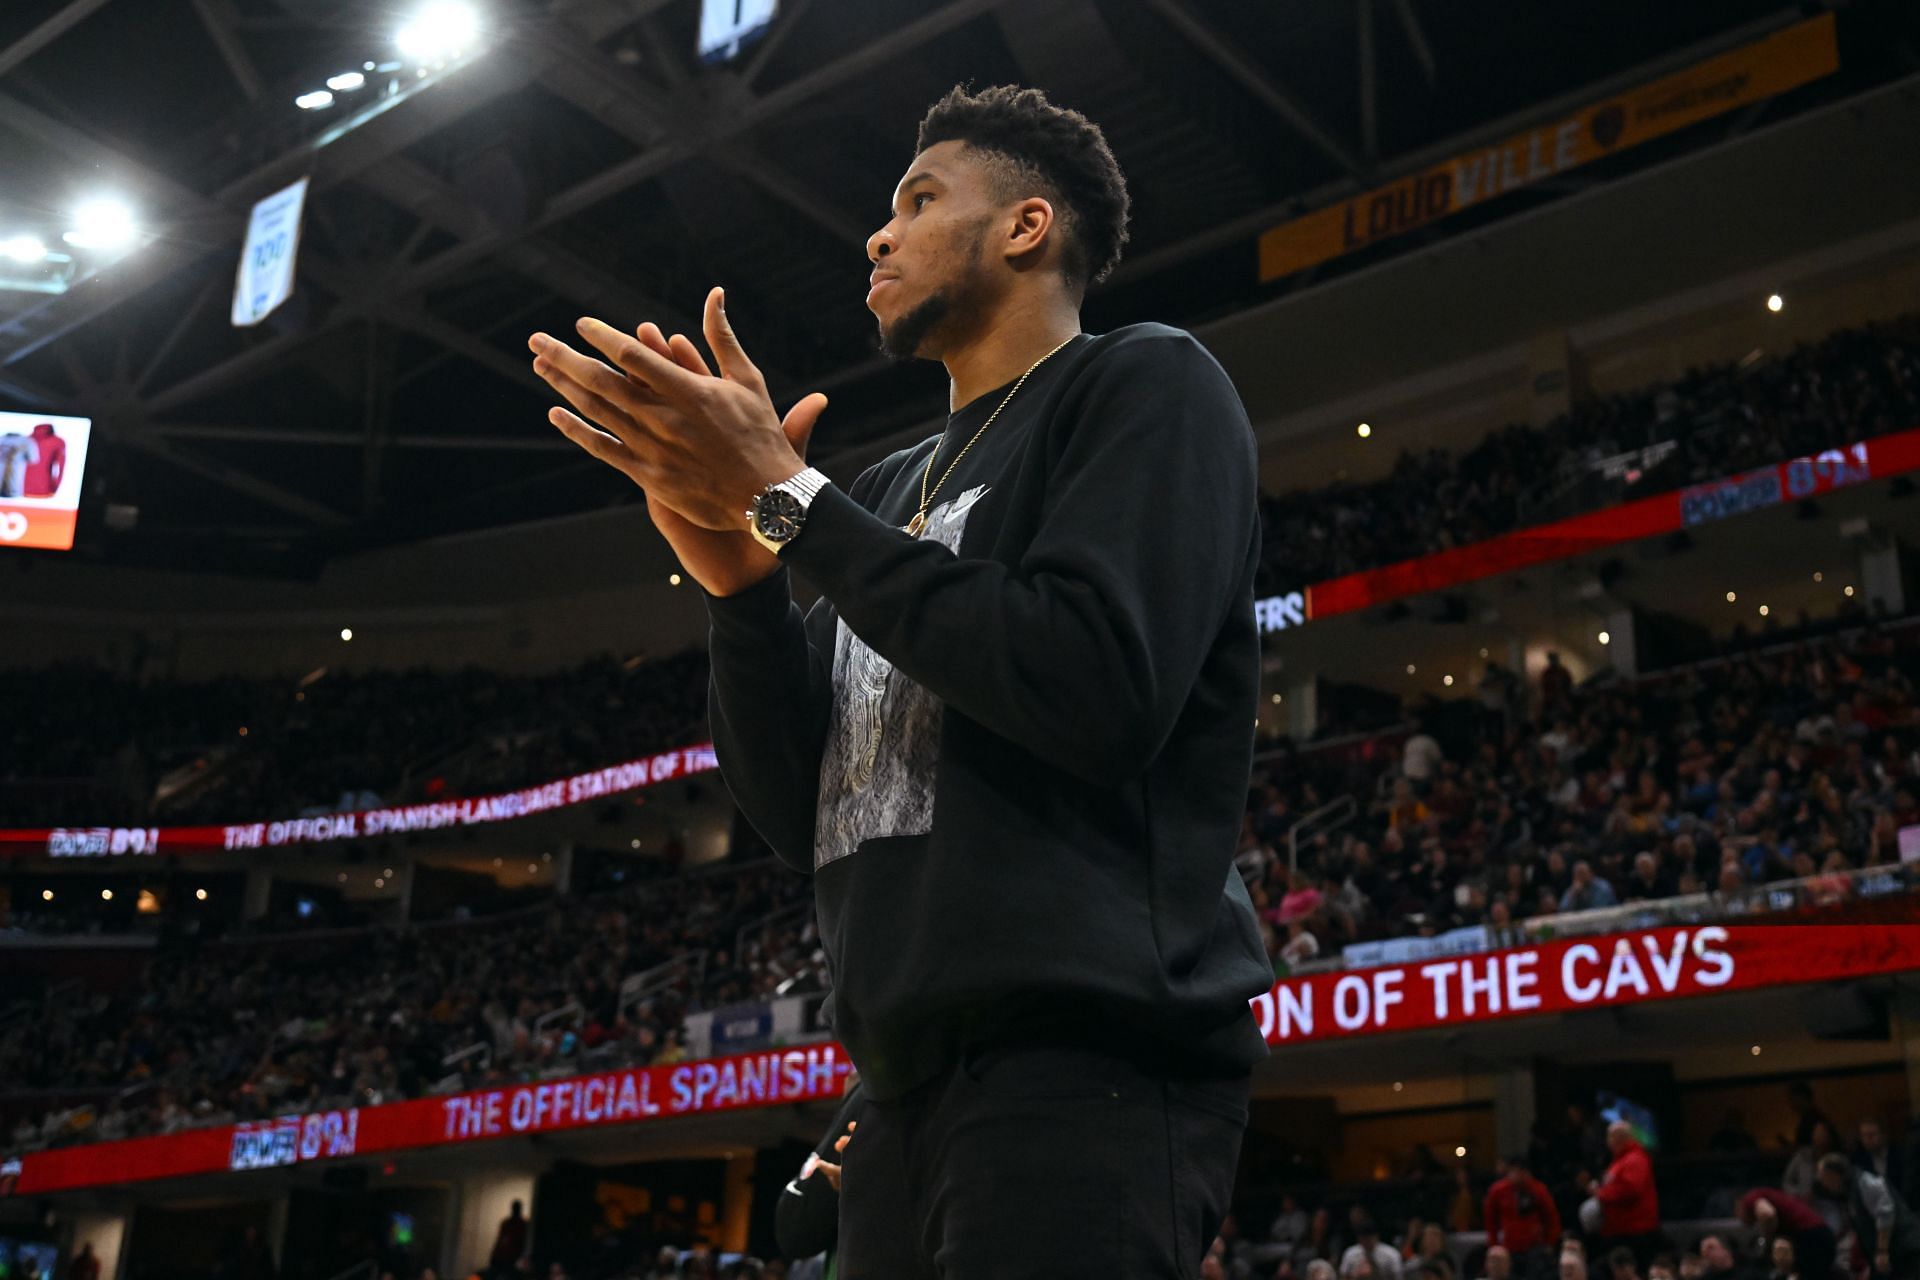 Giannis Antetokounmpo of the Milwaukee Bucks watches from the bench against the Cleveland Cavaliers on April 10 in Cleveland, Ohio. The Cavaliers defeated the Bucks 133-115